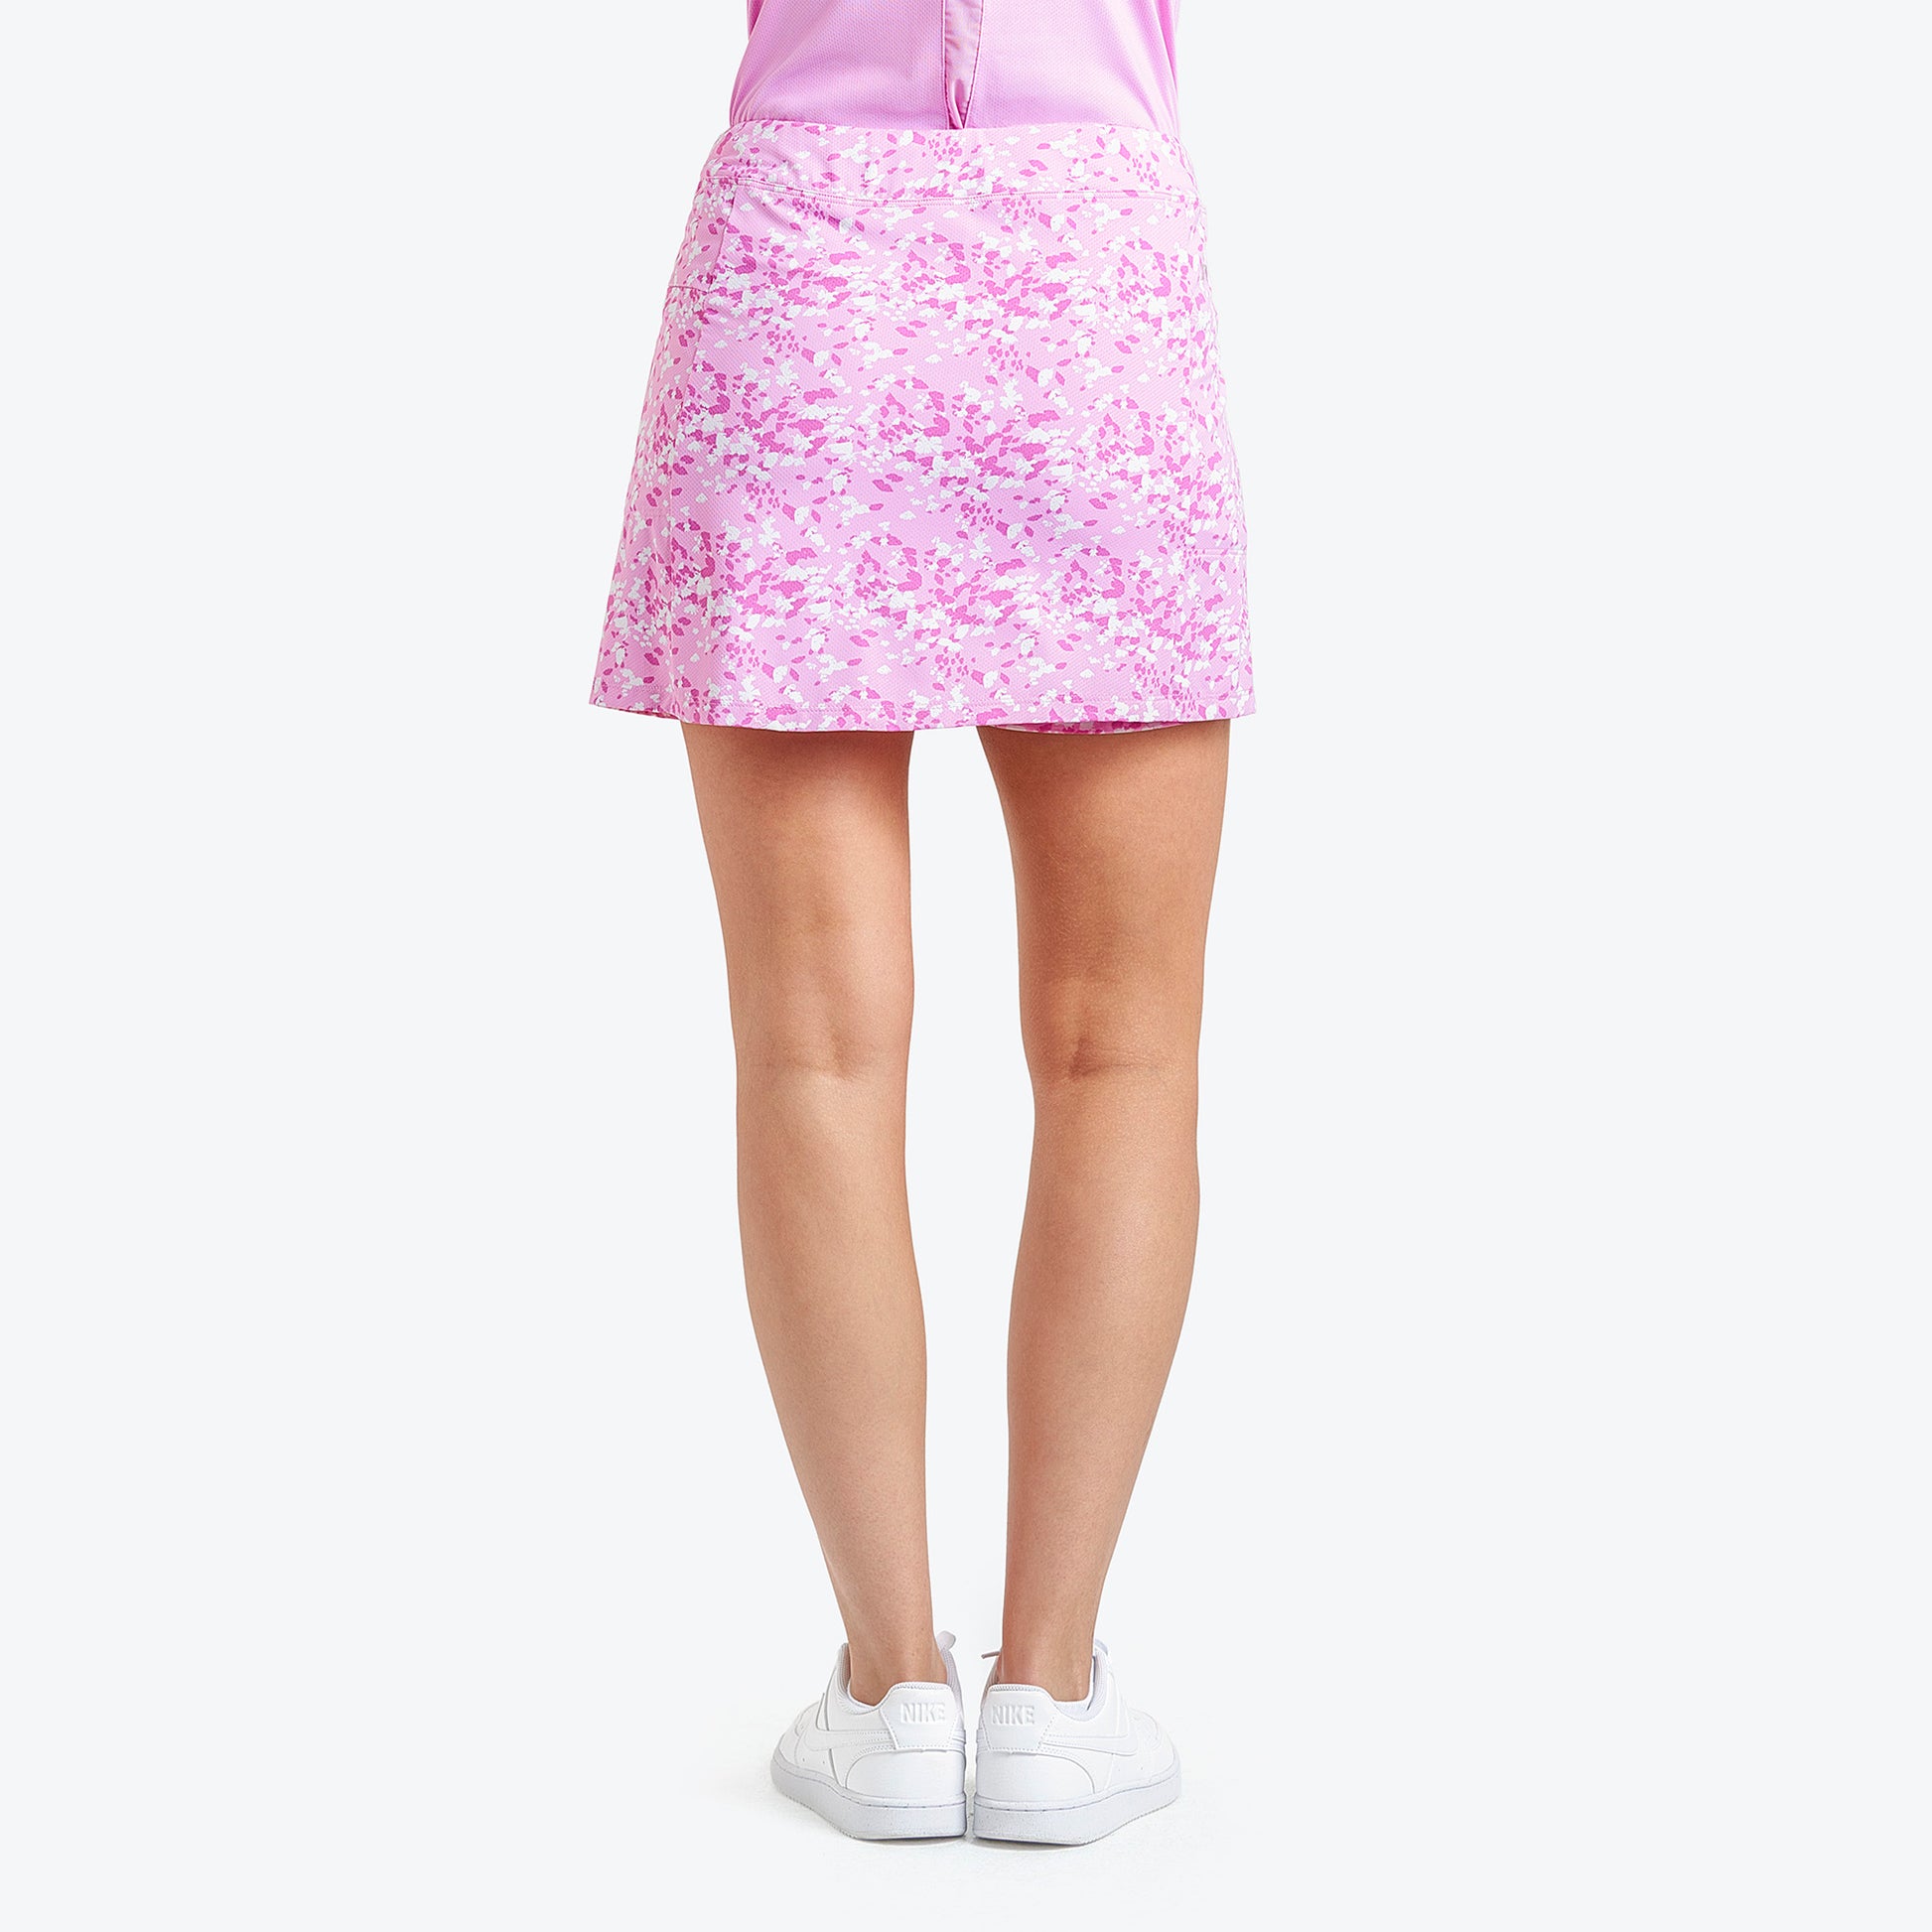 Nivo Ladies Livcool Pull-On Skort in Bubble Gum Abstract Floral Print